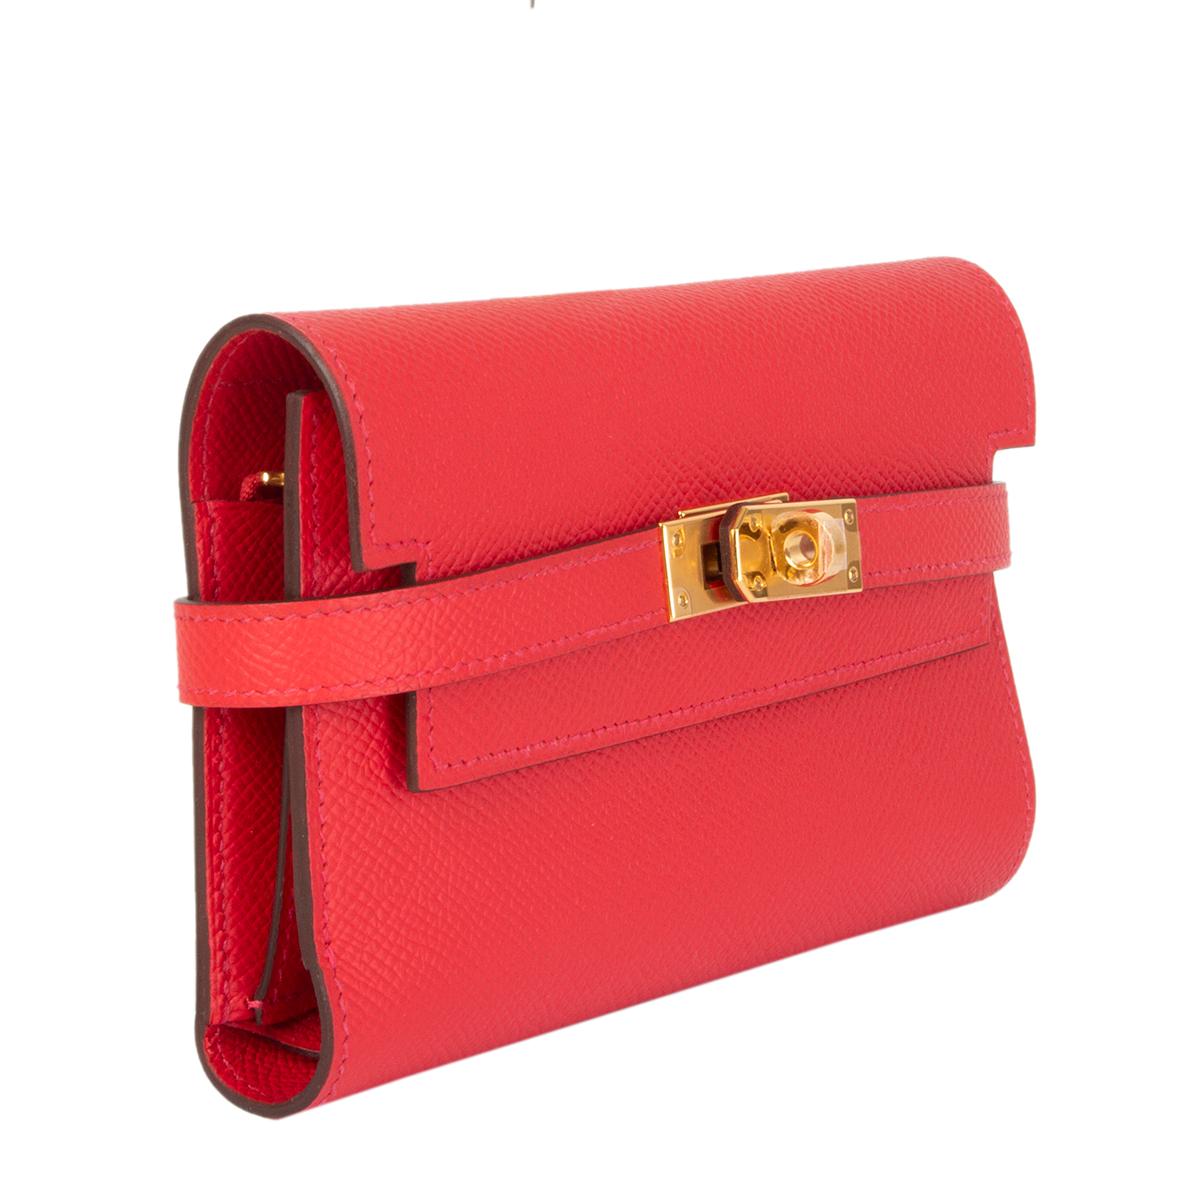 Hermes 'Kelly Depliant Medium' wallet in Bougainvillea Veau Epsom leather. Large pocket for bills, five credit card slots, half-size pocket and zip pocket for coins. Brand new. Comes with box.

Width 16.5cm (6.4in)
Height 9.5cm (3.7in)
Depth 2cm